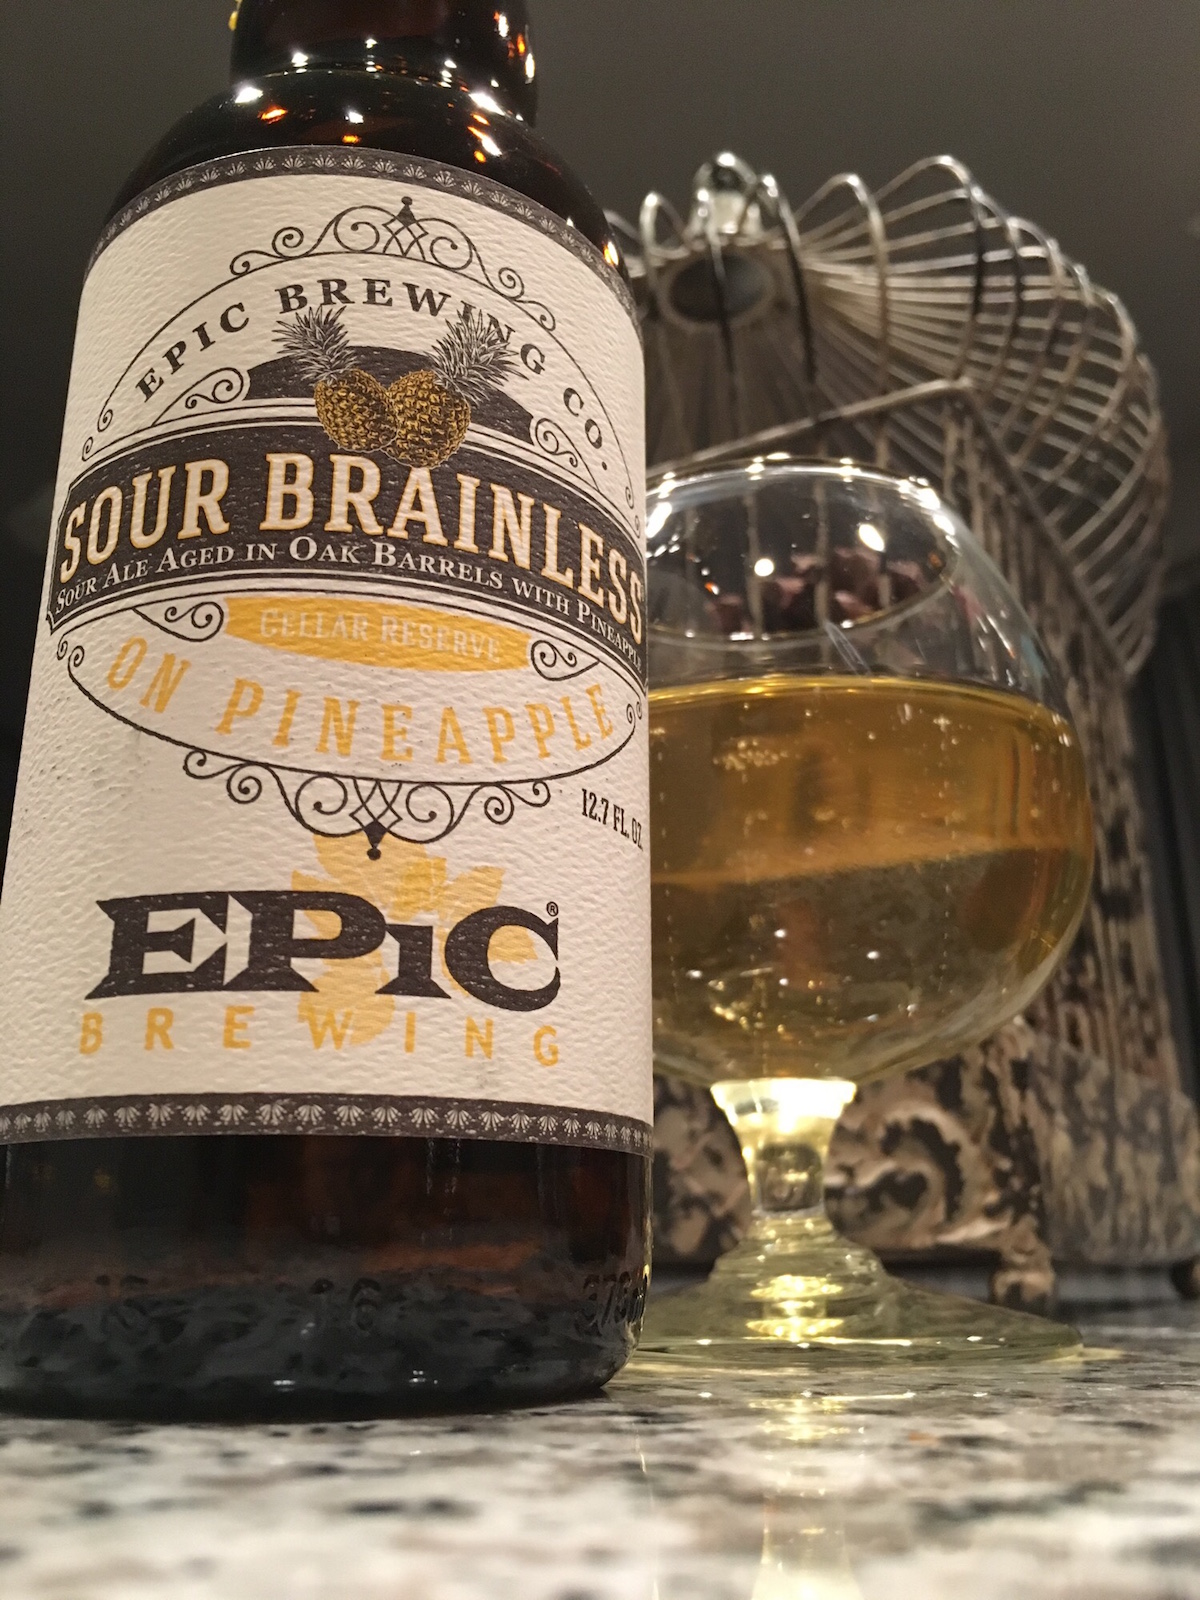 epic-brewing-company-sour-brainless-on-pineapple